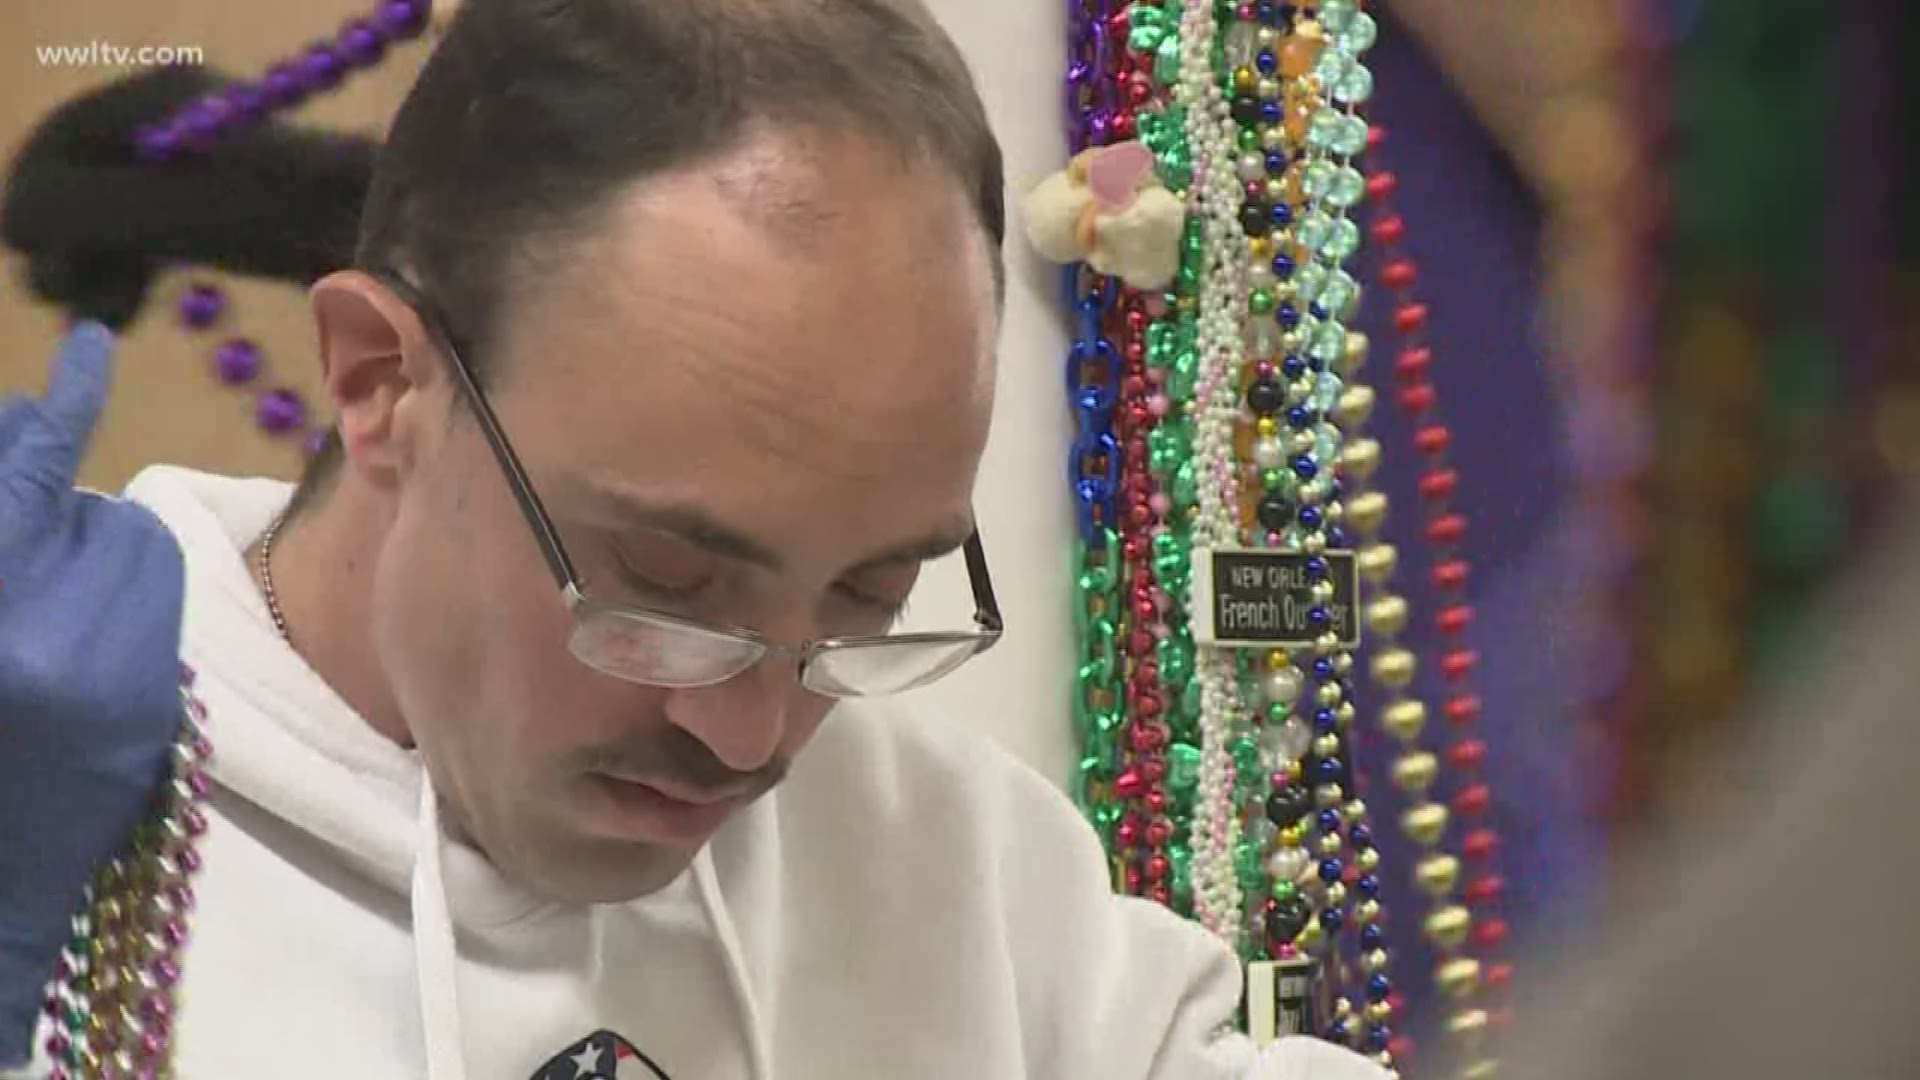 The krewes of Rex, Excalibur and Centurions are making it a point to get many of their beads from the non-profit that employs people facing challenges.